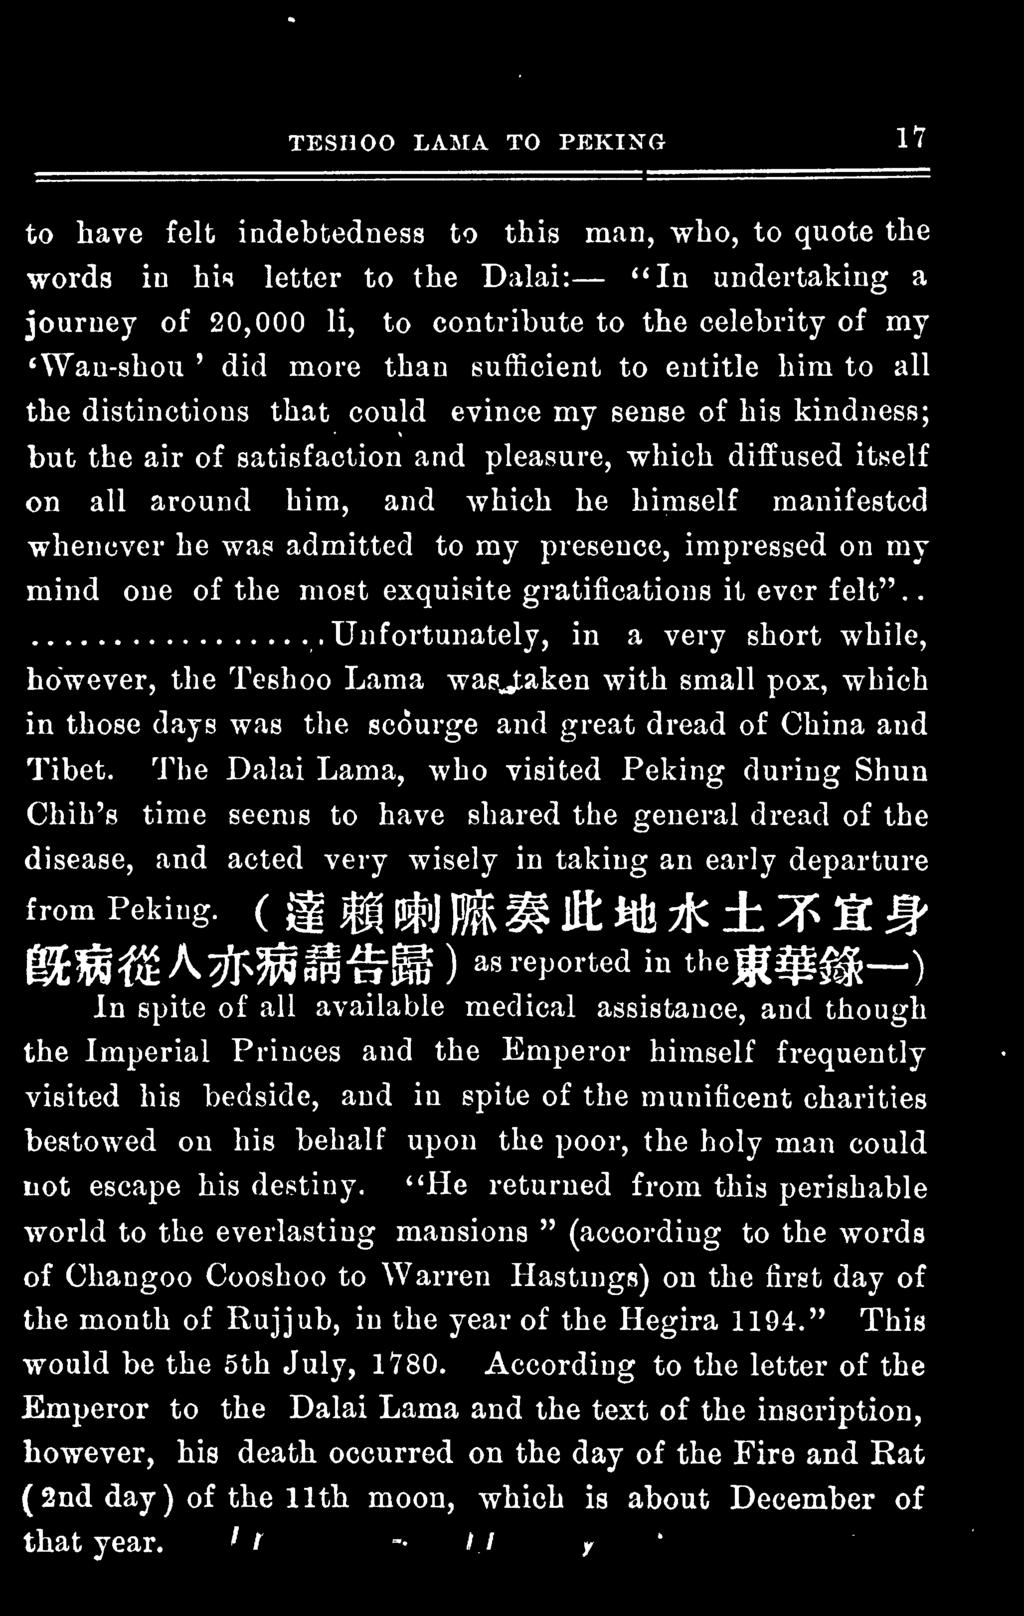 The Dalai Lama, who visited Peking during Shun Chih's time seems to have shared the general dread of the disease, and acted very wisely in taking an early departure from Peking.